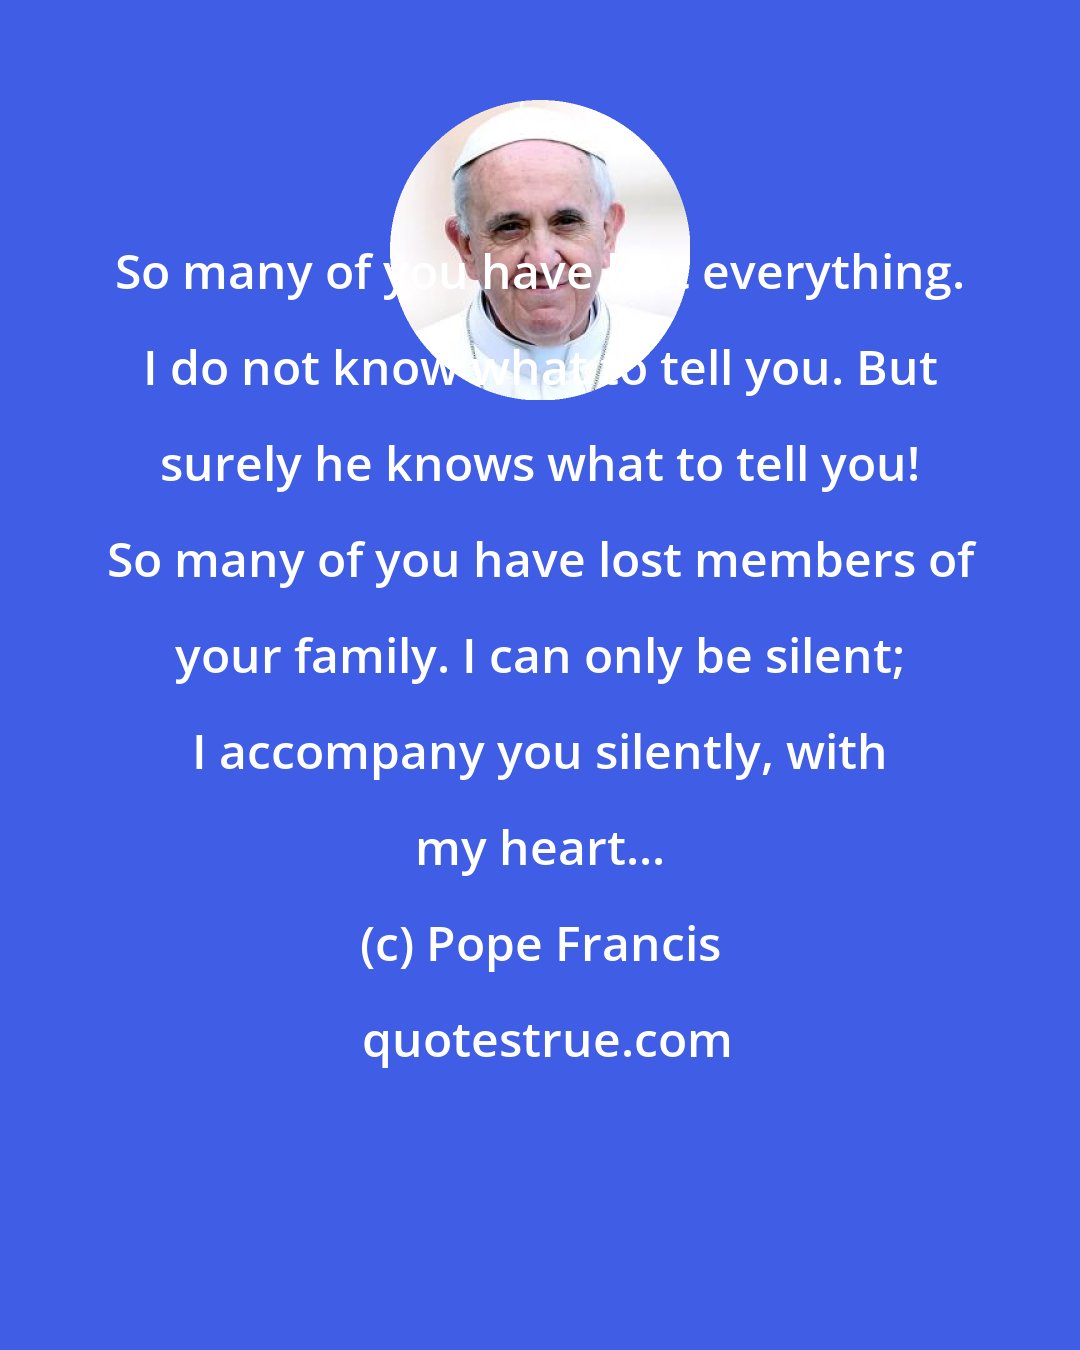 Pope Francis: So many of you have lost everything. I do not know what to tell you. But surely he knows what to tell you! So many of you have lost members of your family. I can only be silent; I accompany you silently, with my heart...